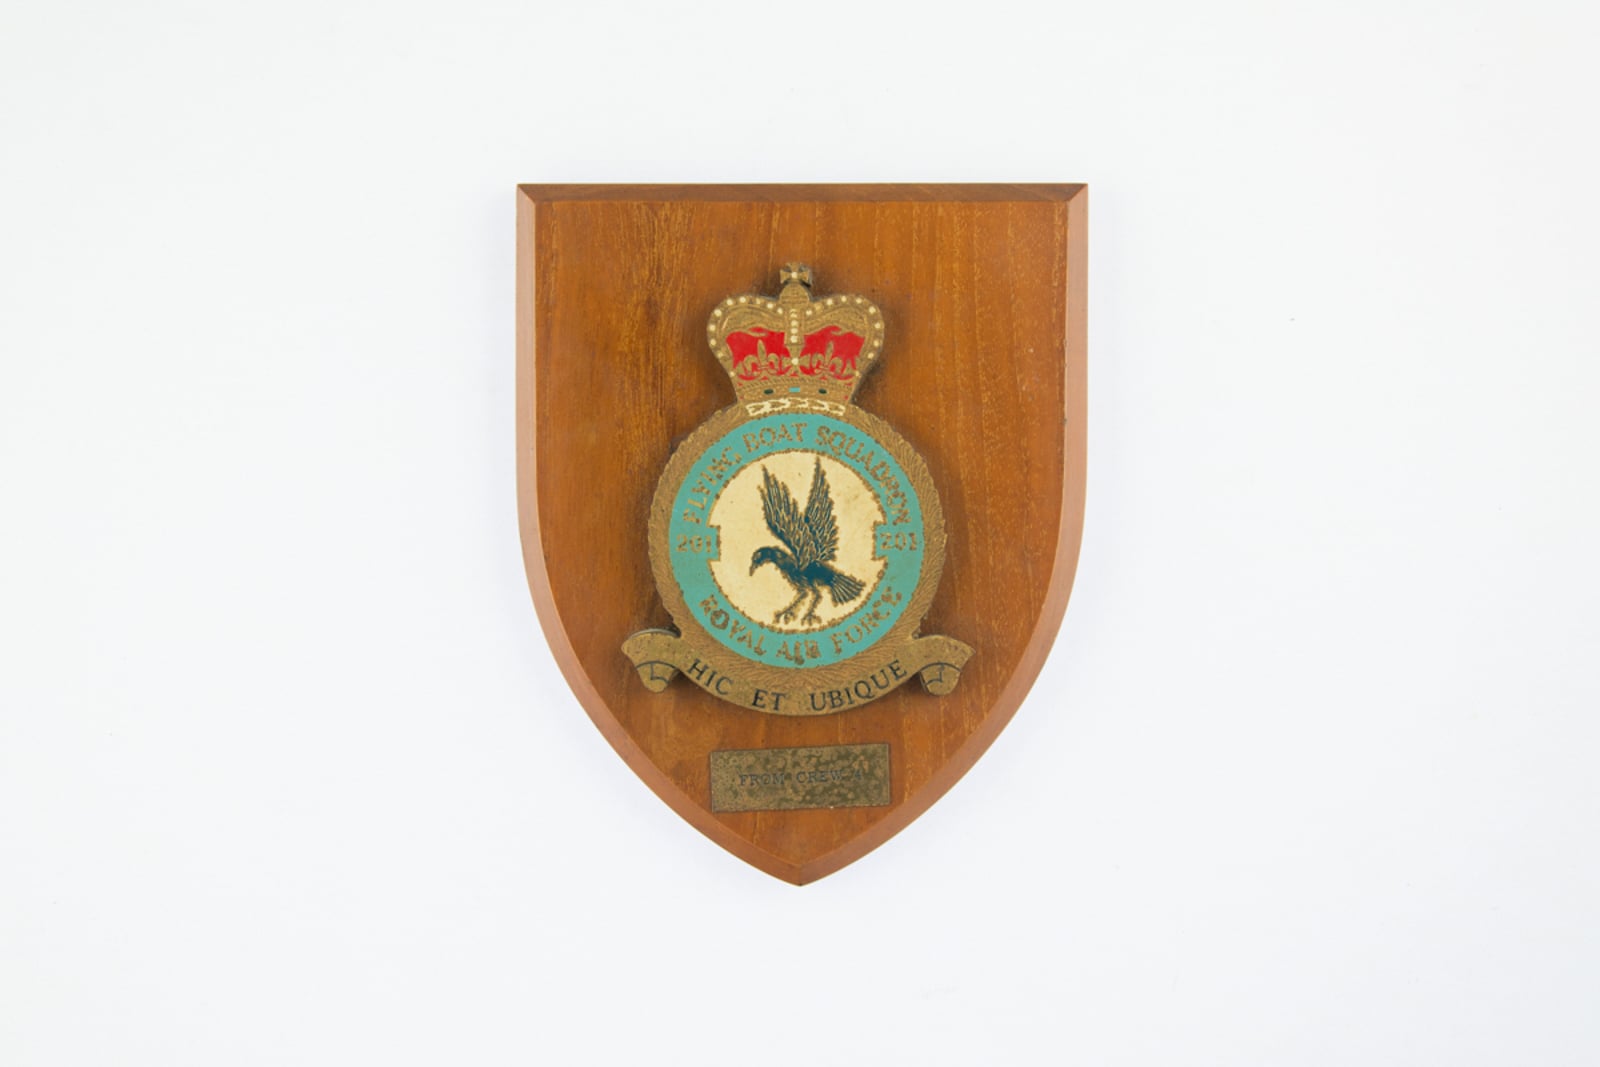 Flying Boat Squadron 201 Plaque